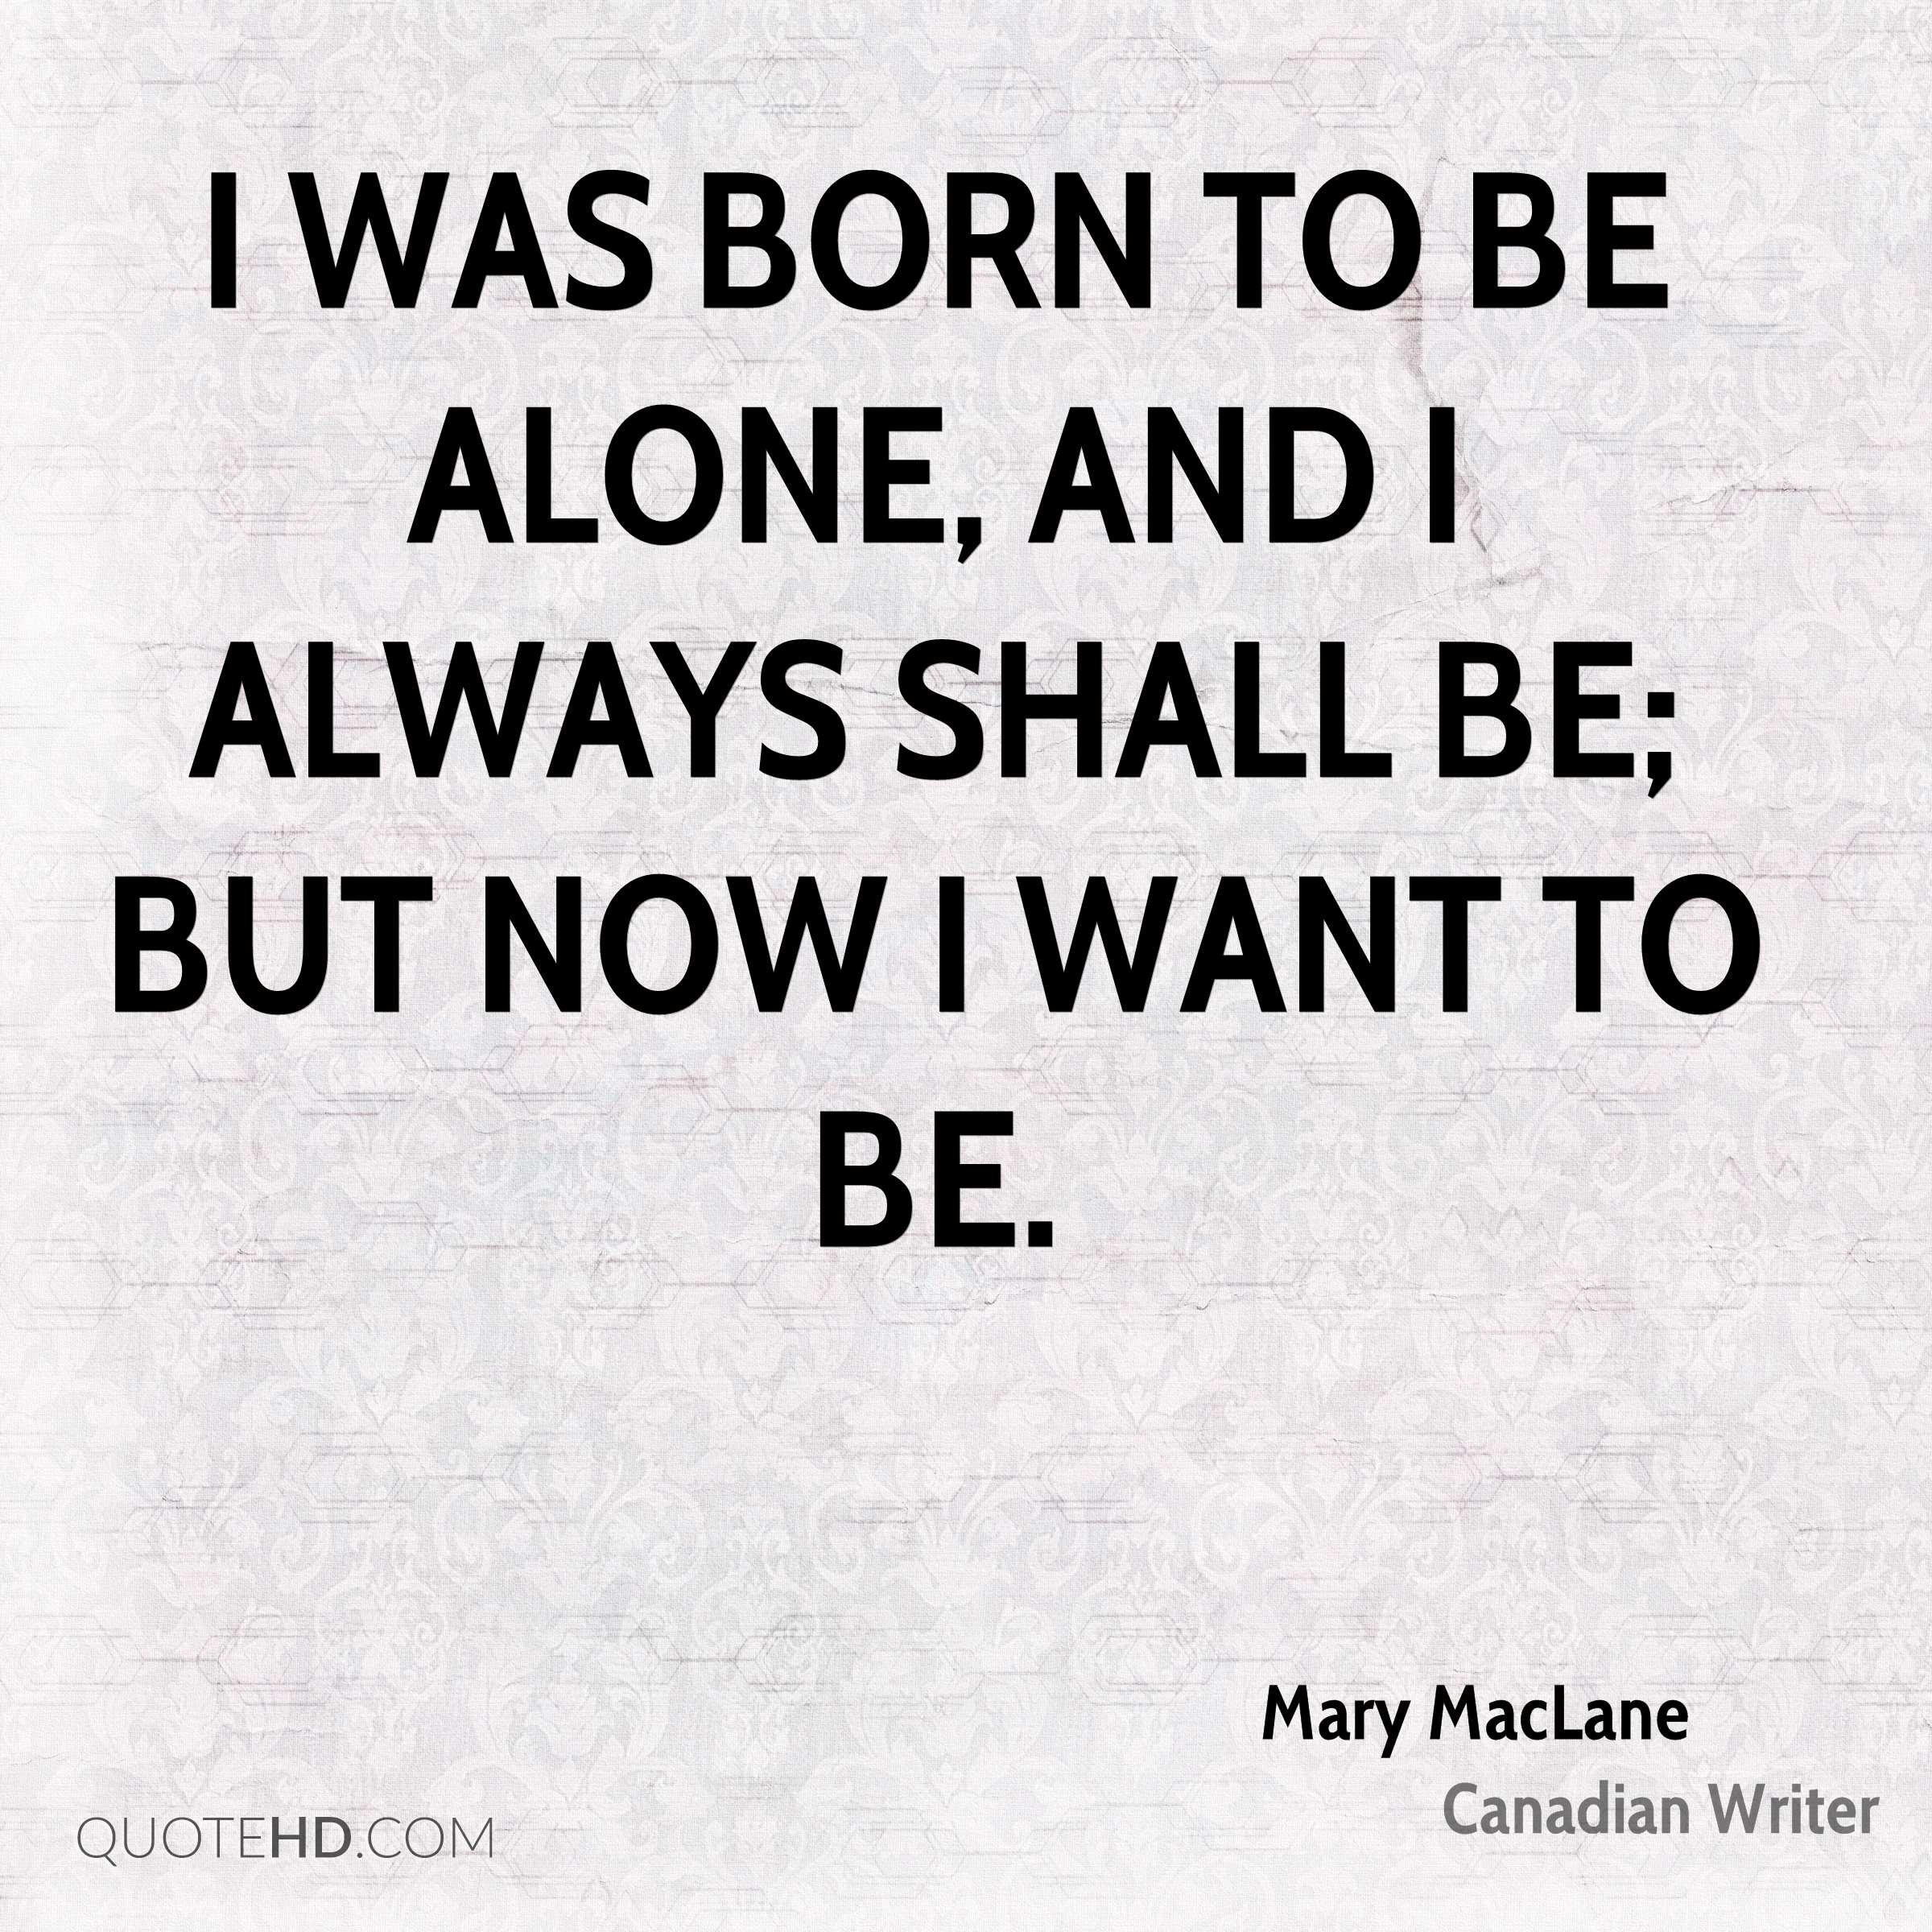 Mary MacLane Quotes | QuoteHD